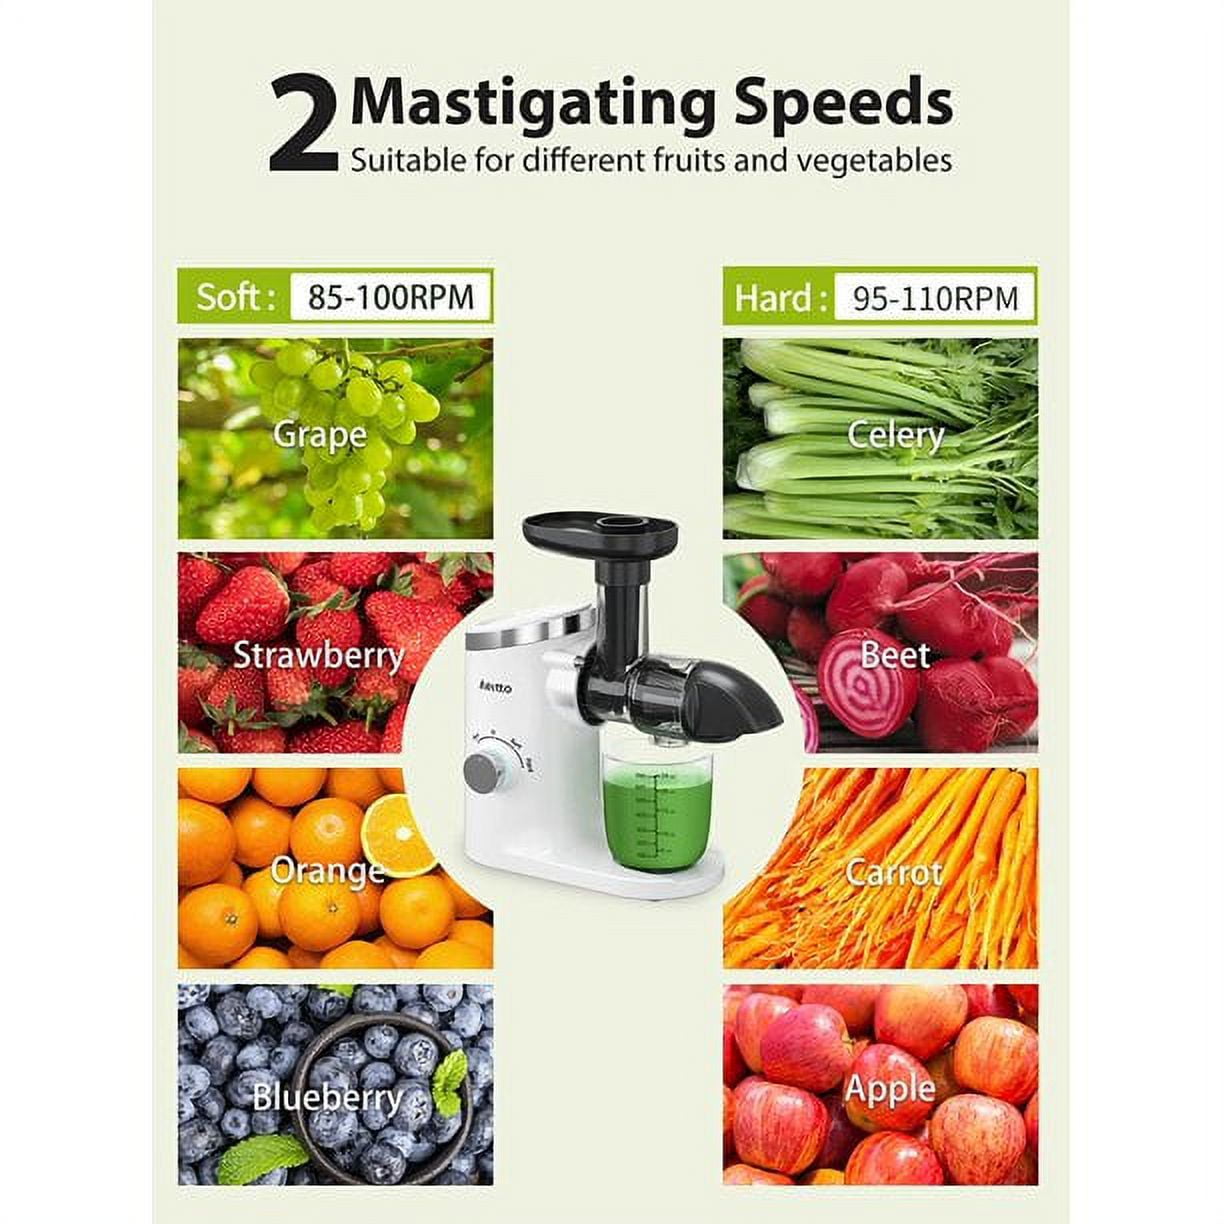 Manual Apple Juicer Machine In Mechanical And Automated Variants 